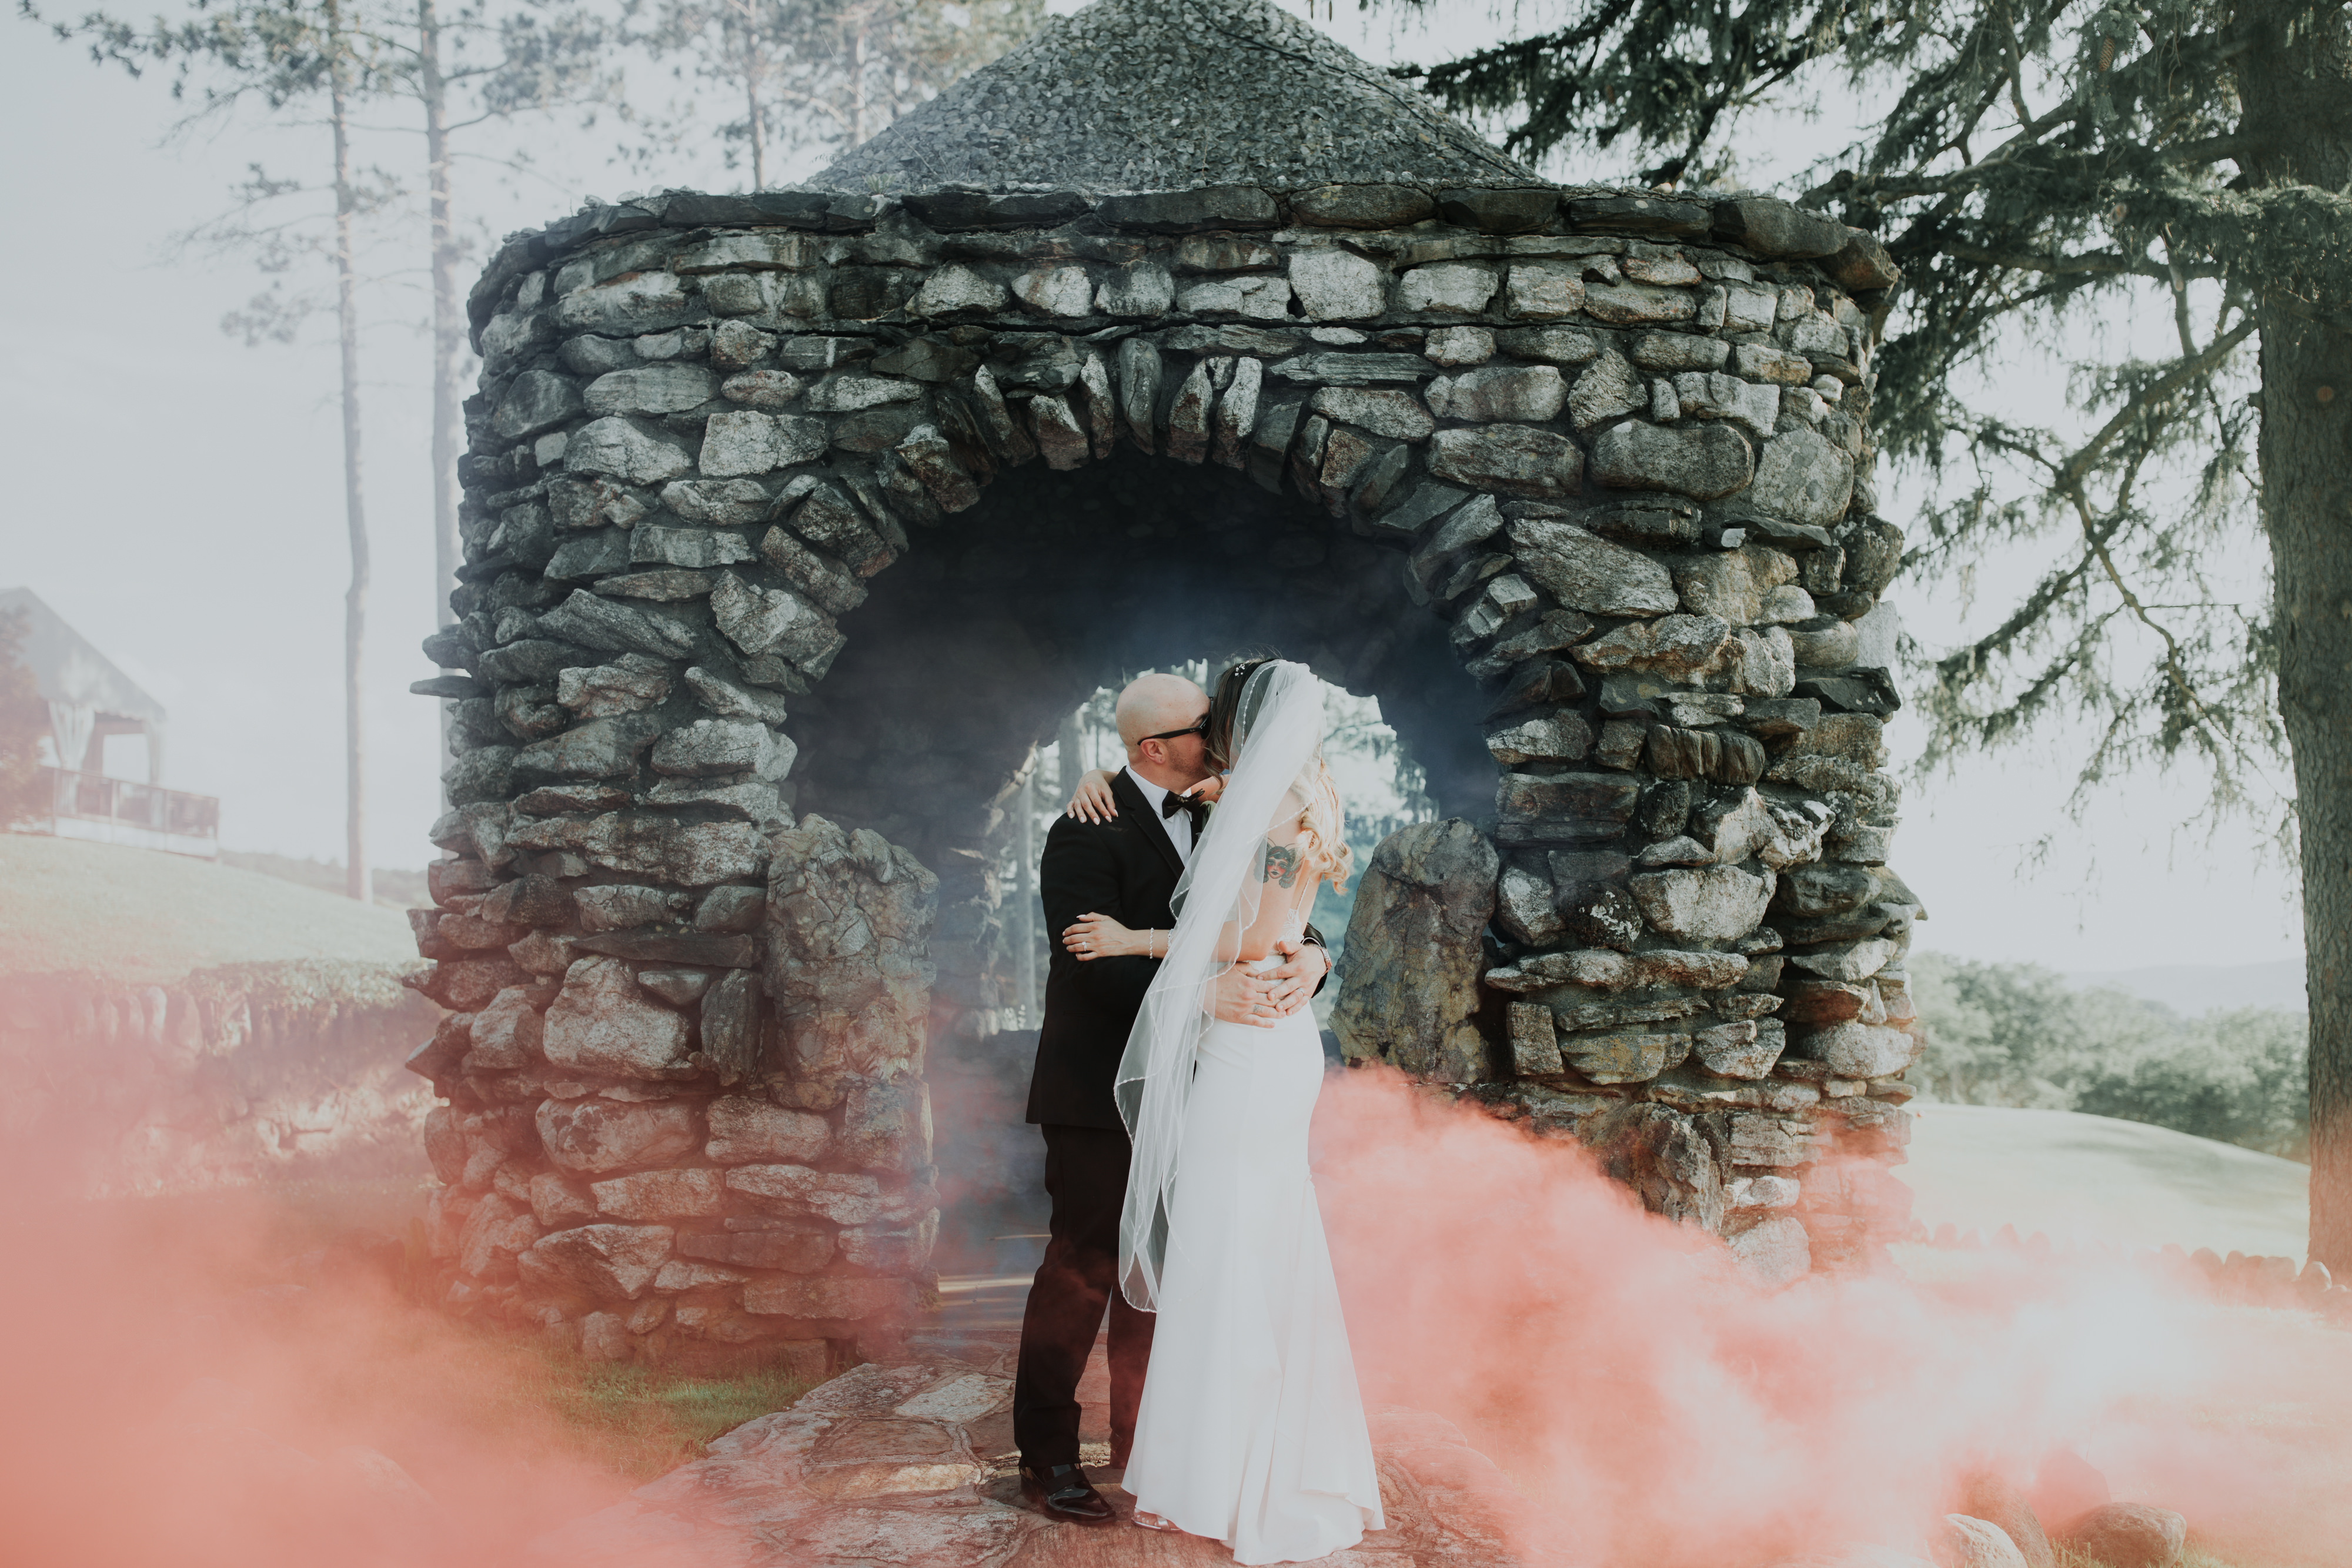 A man and woman embrace while pink smoke floats around them.